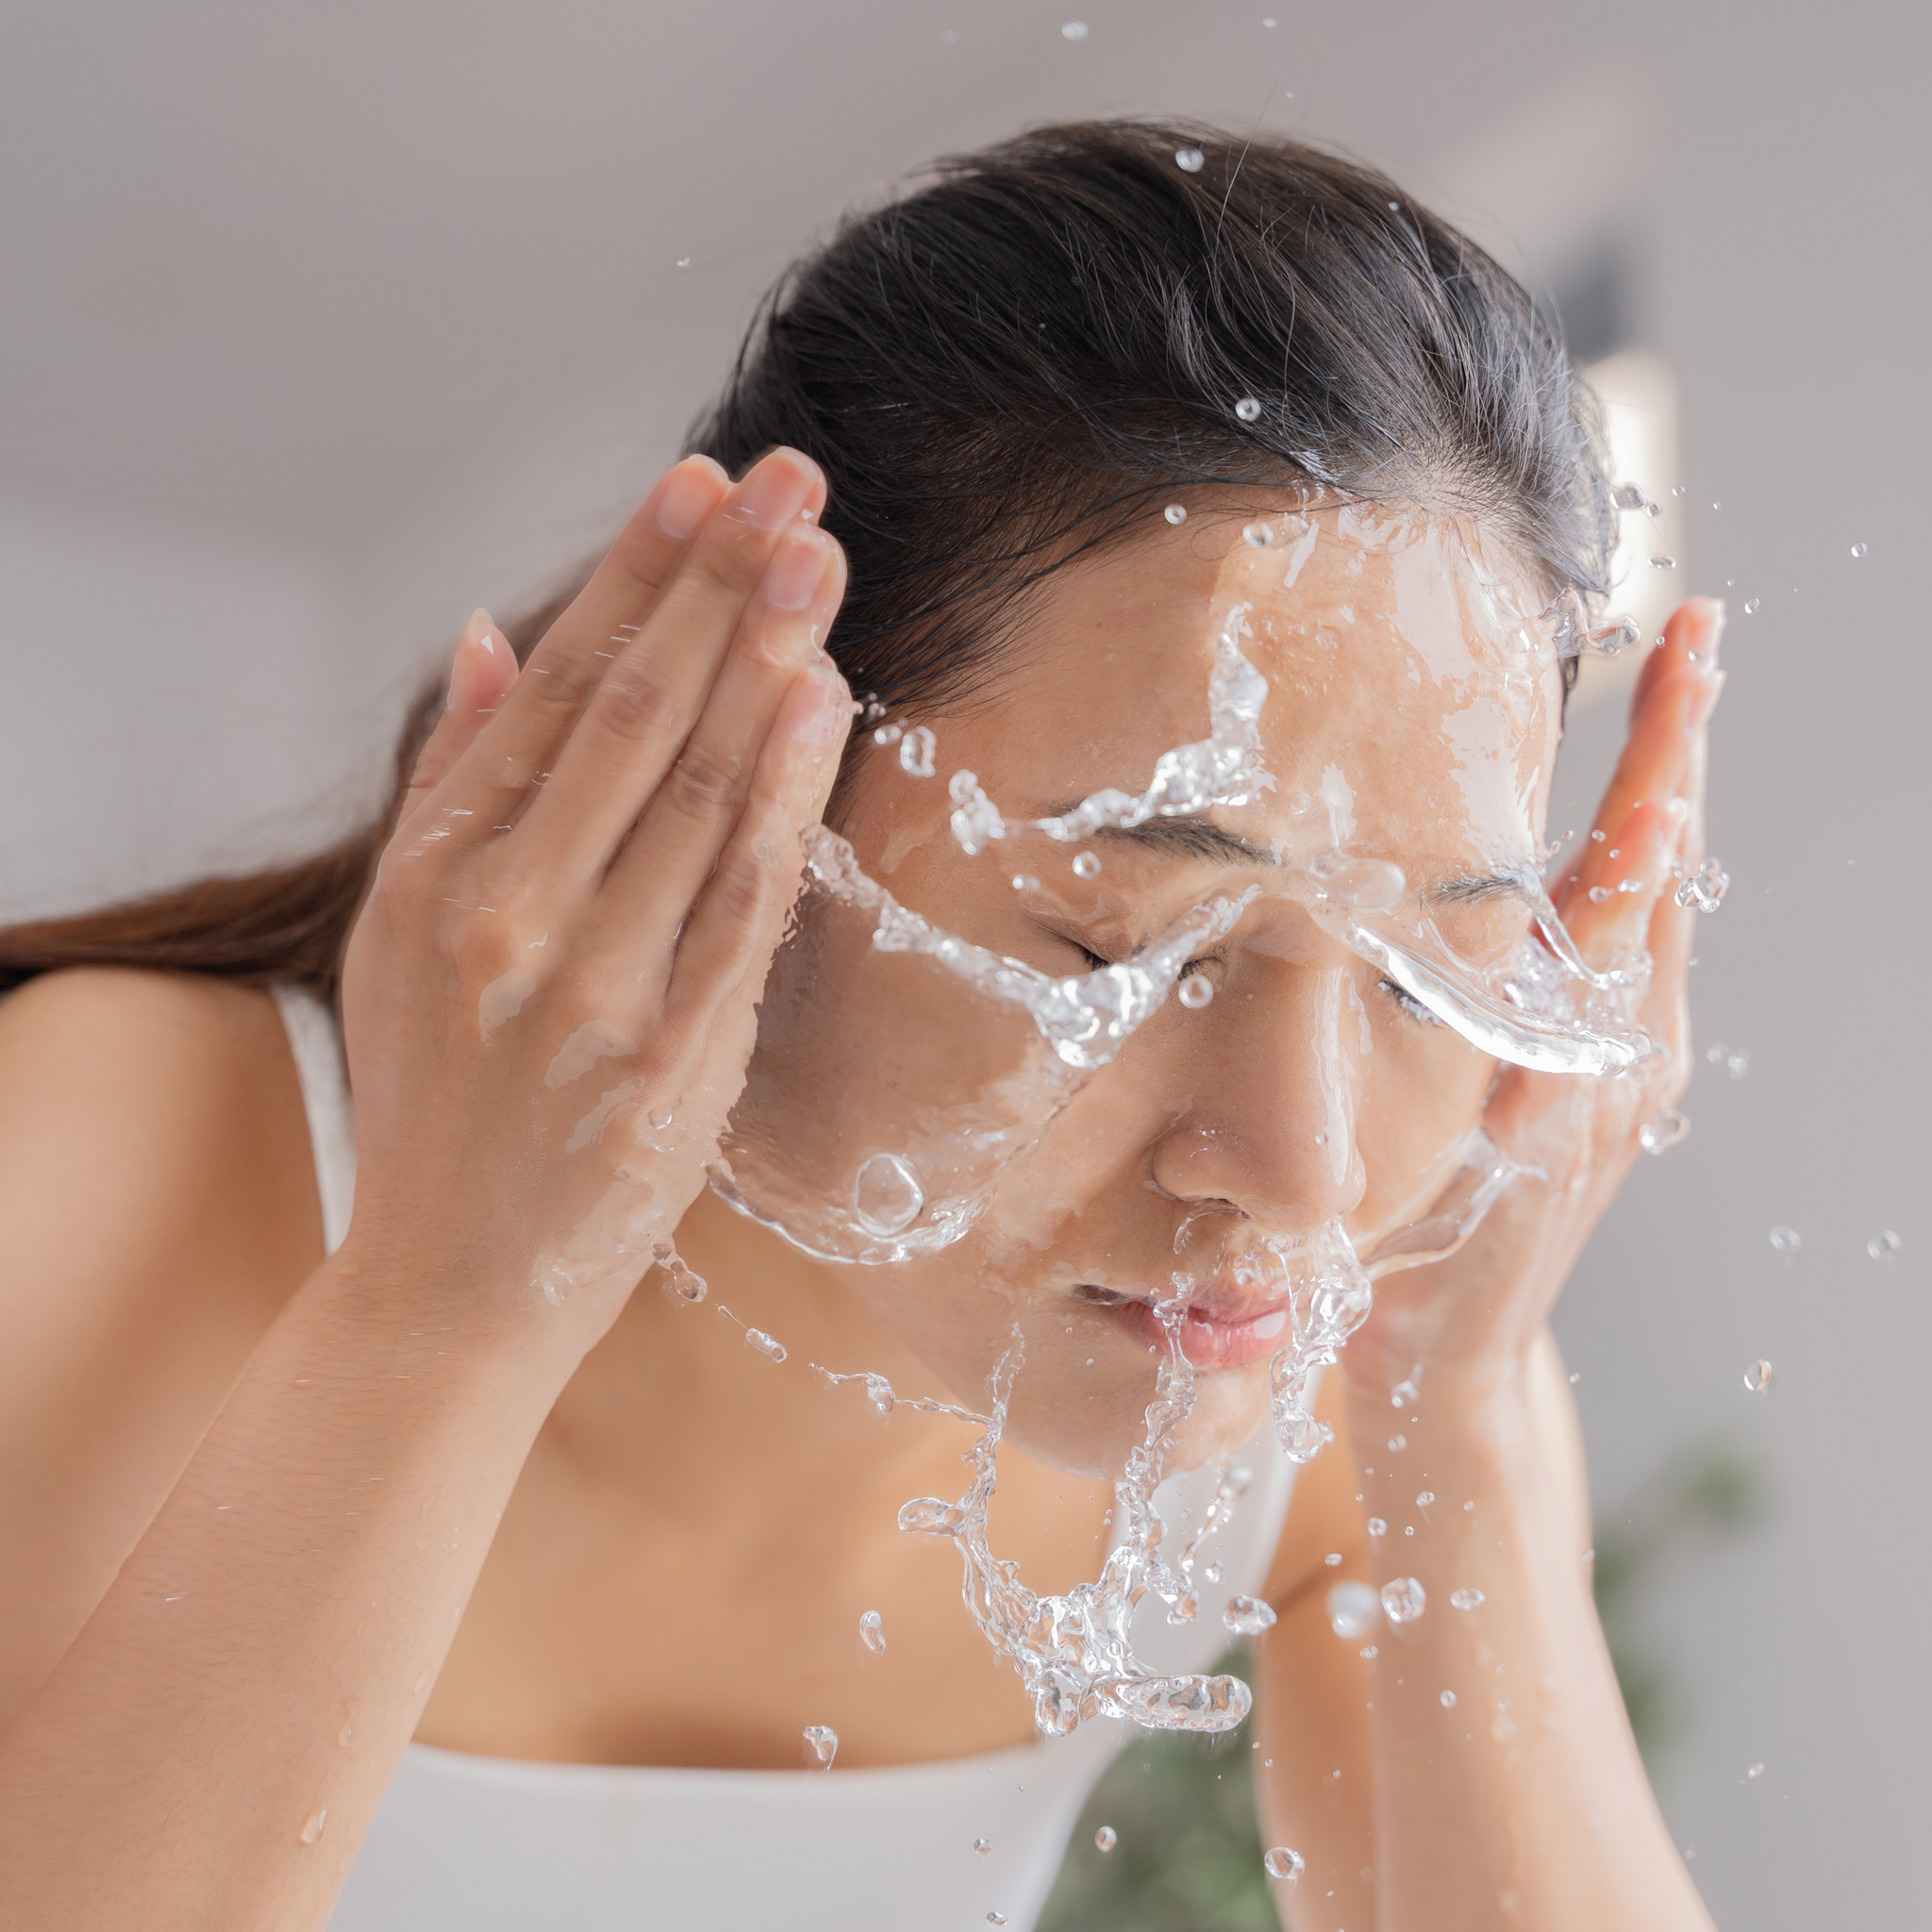 EXFOLIATION: DON'T FORGET THIS CRUCIAL STEP